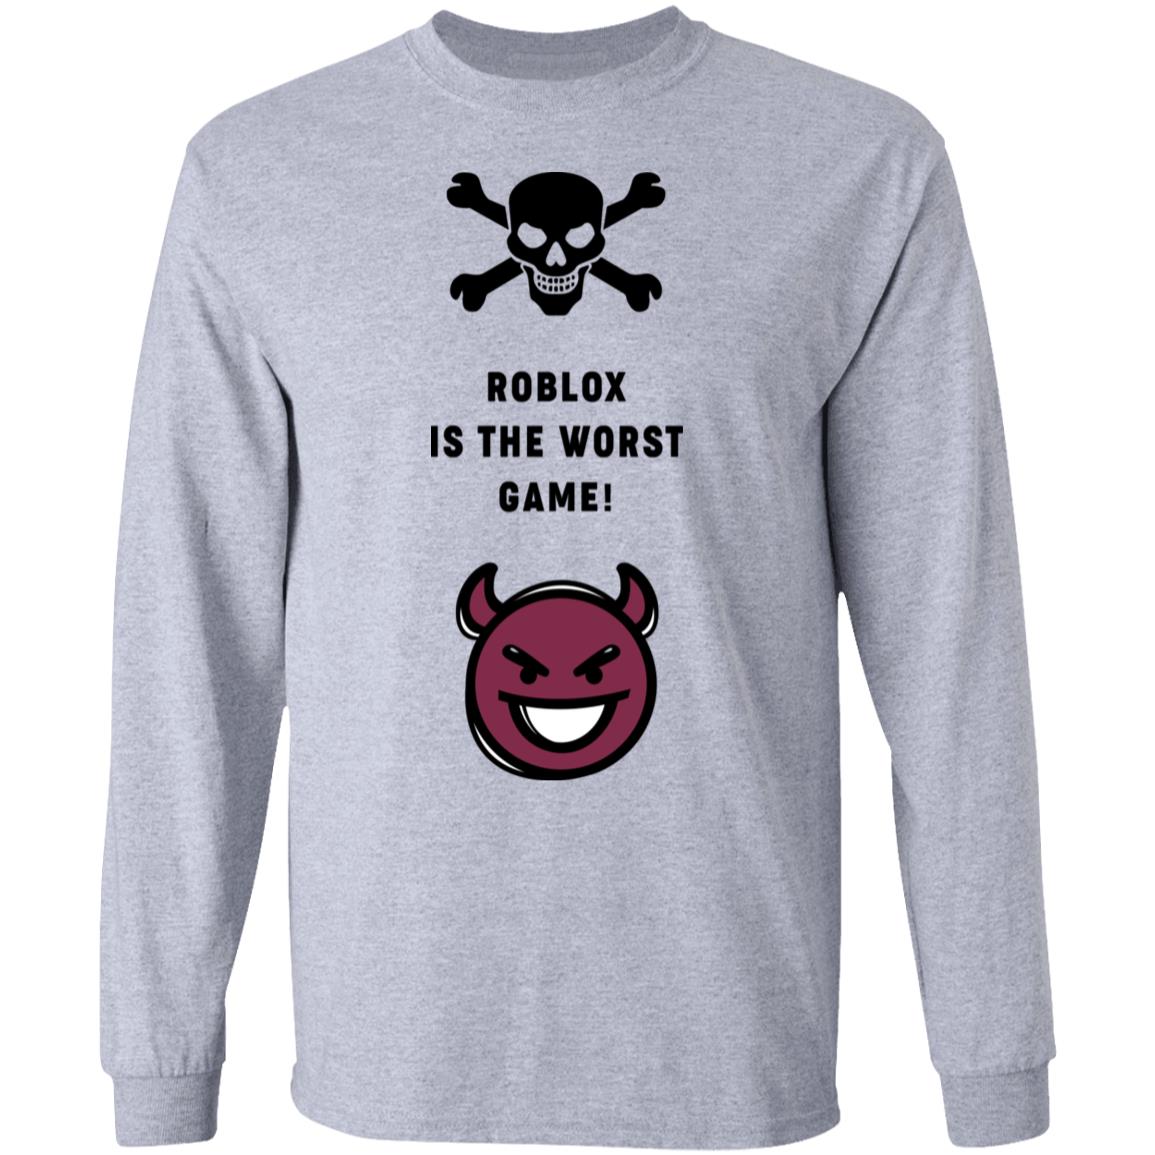 Roblox Is The Worst Game Funny Roblox T Shirts Hoodies Long Sleeve - long roblox